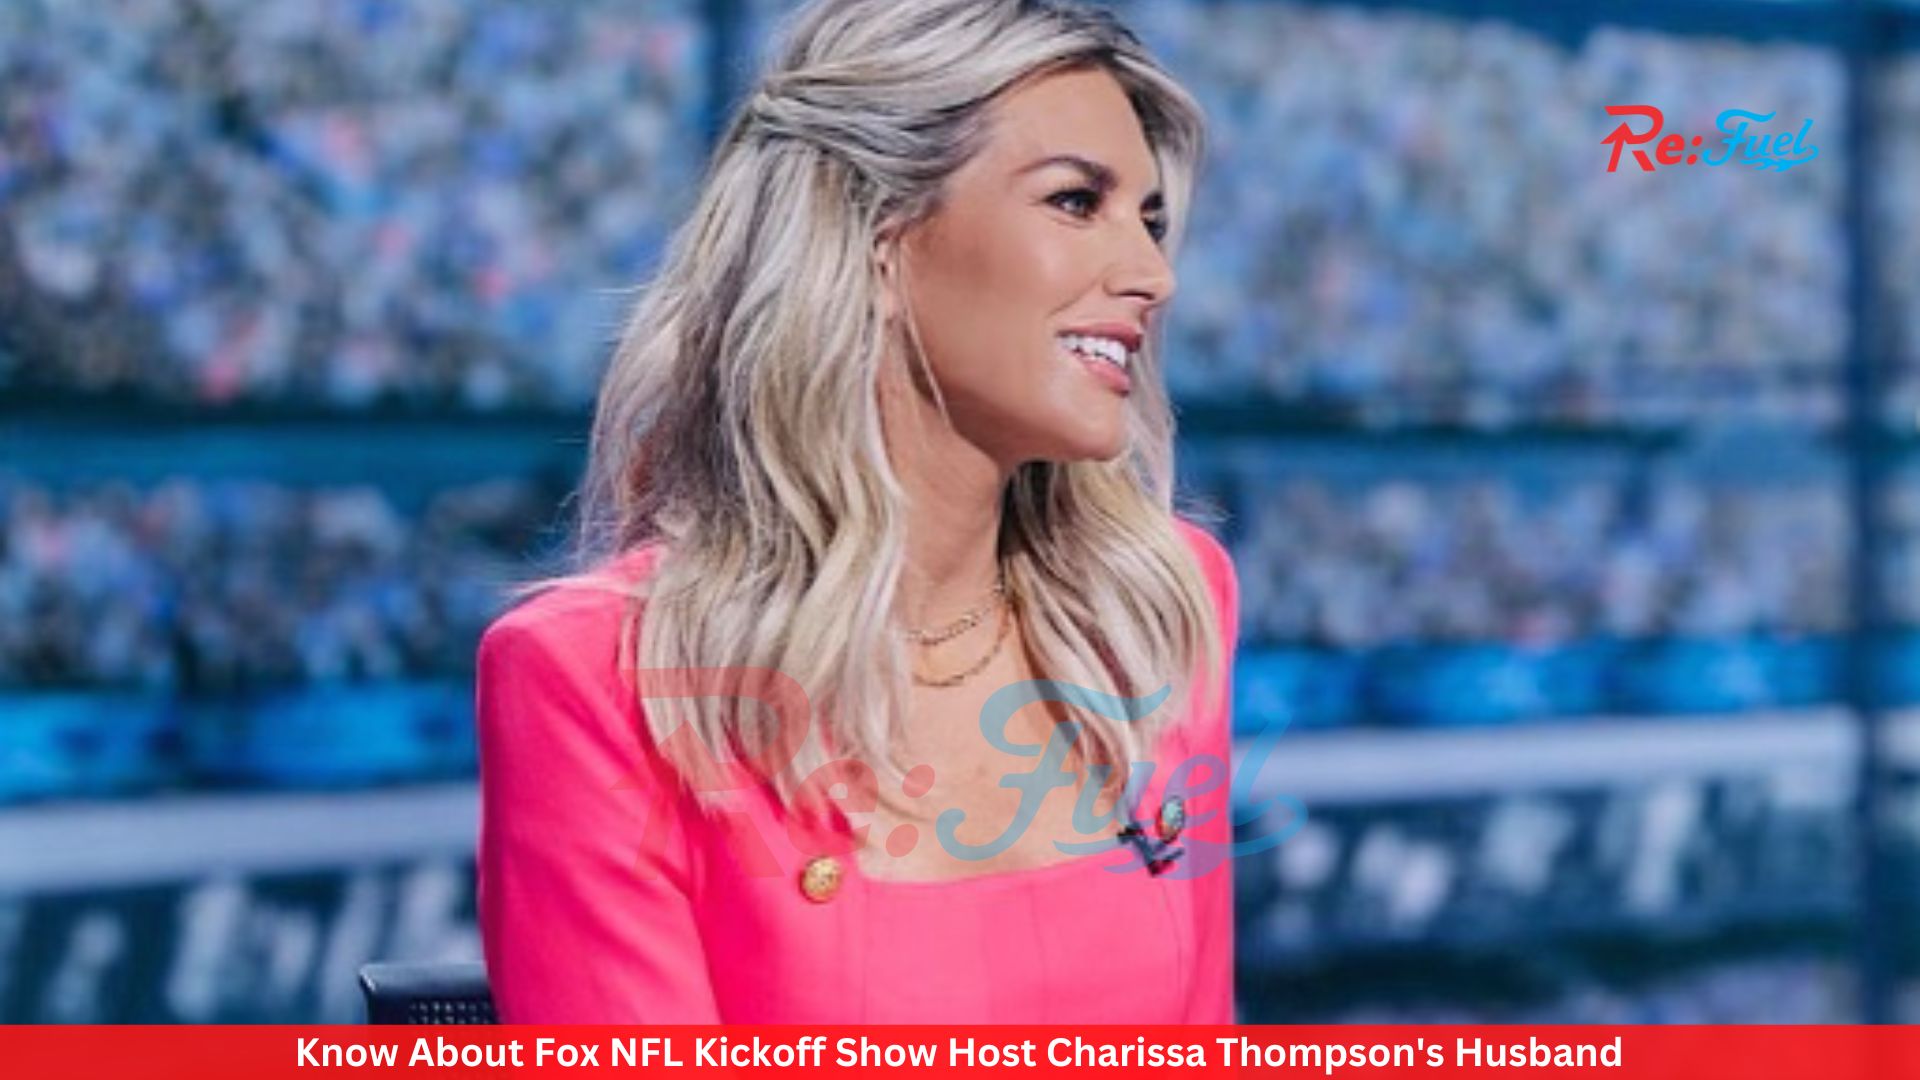 Know About Fox NFL Kickoff Show Host Charissa Thompson's Husband